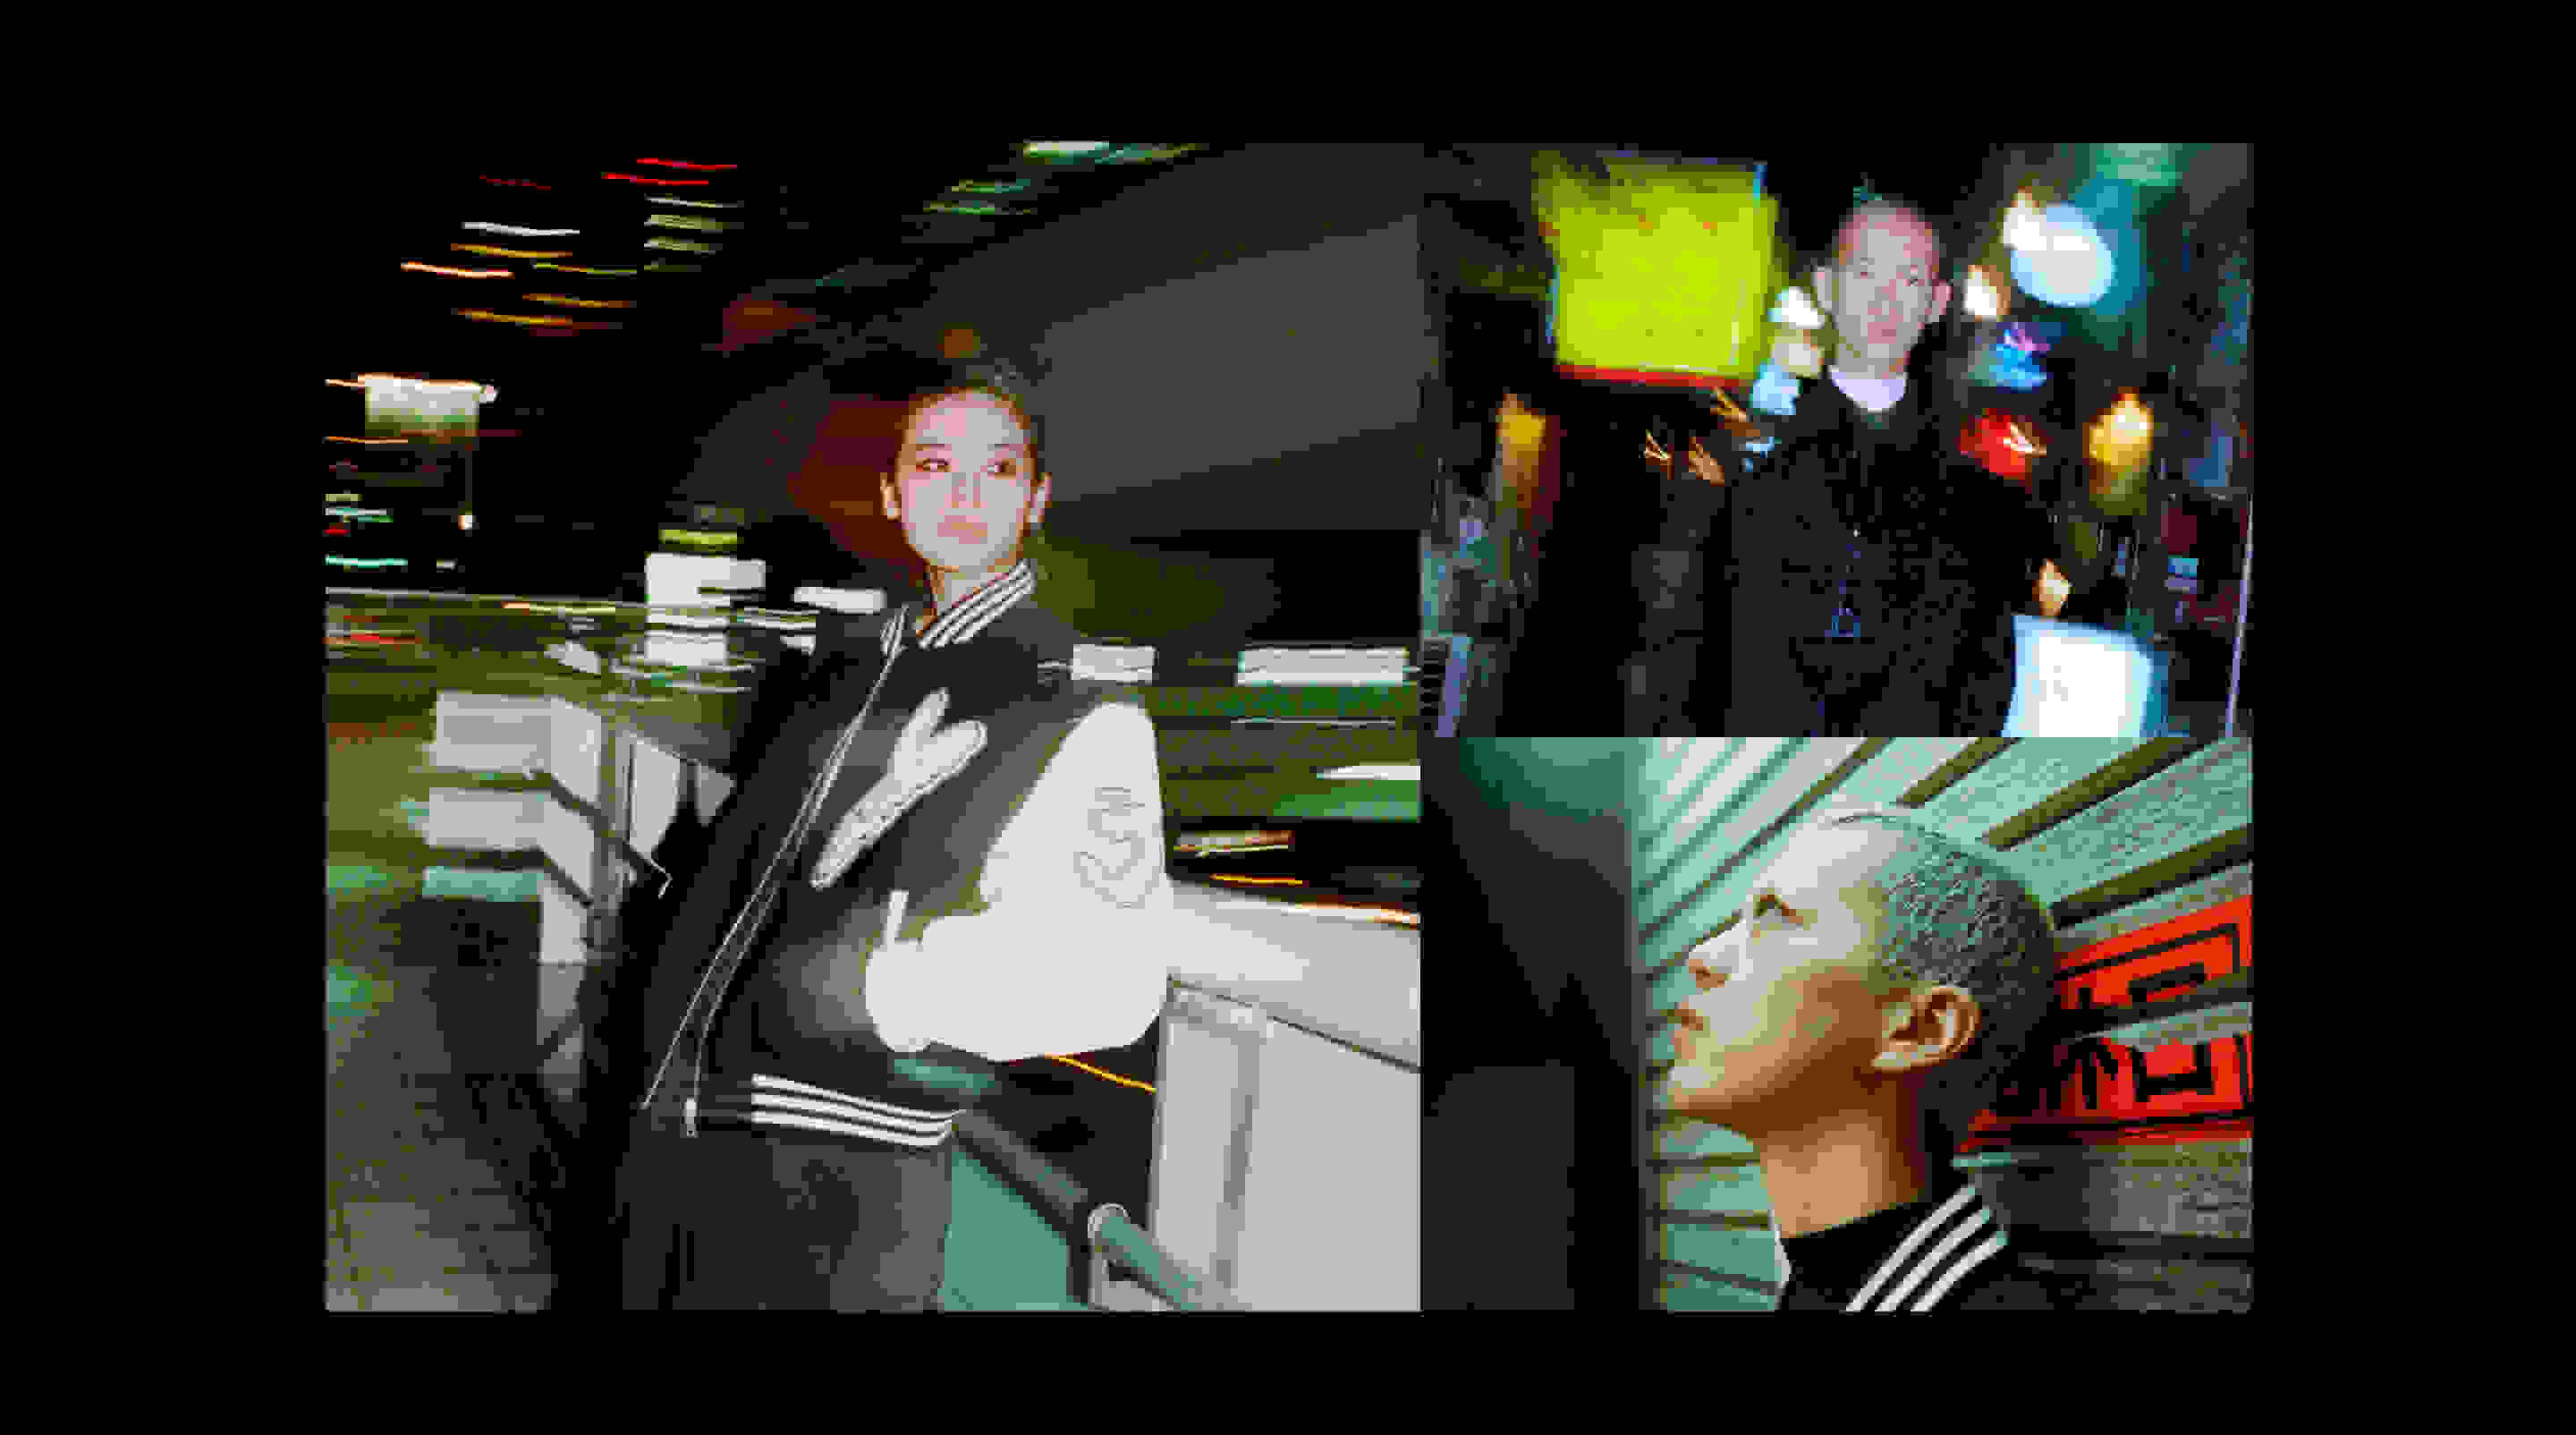 A collage of blurry images of people wearing Y-3 apparel on the street at night.